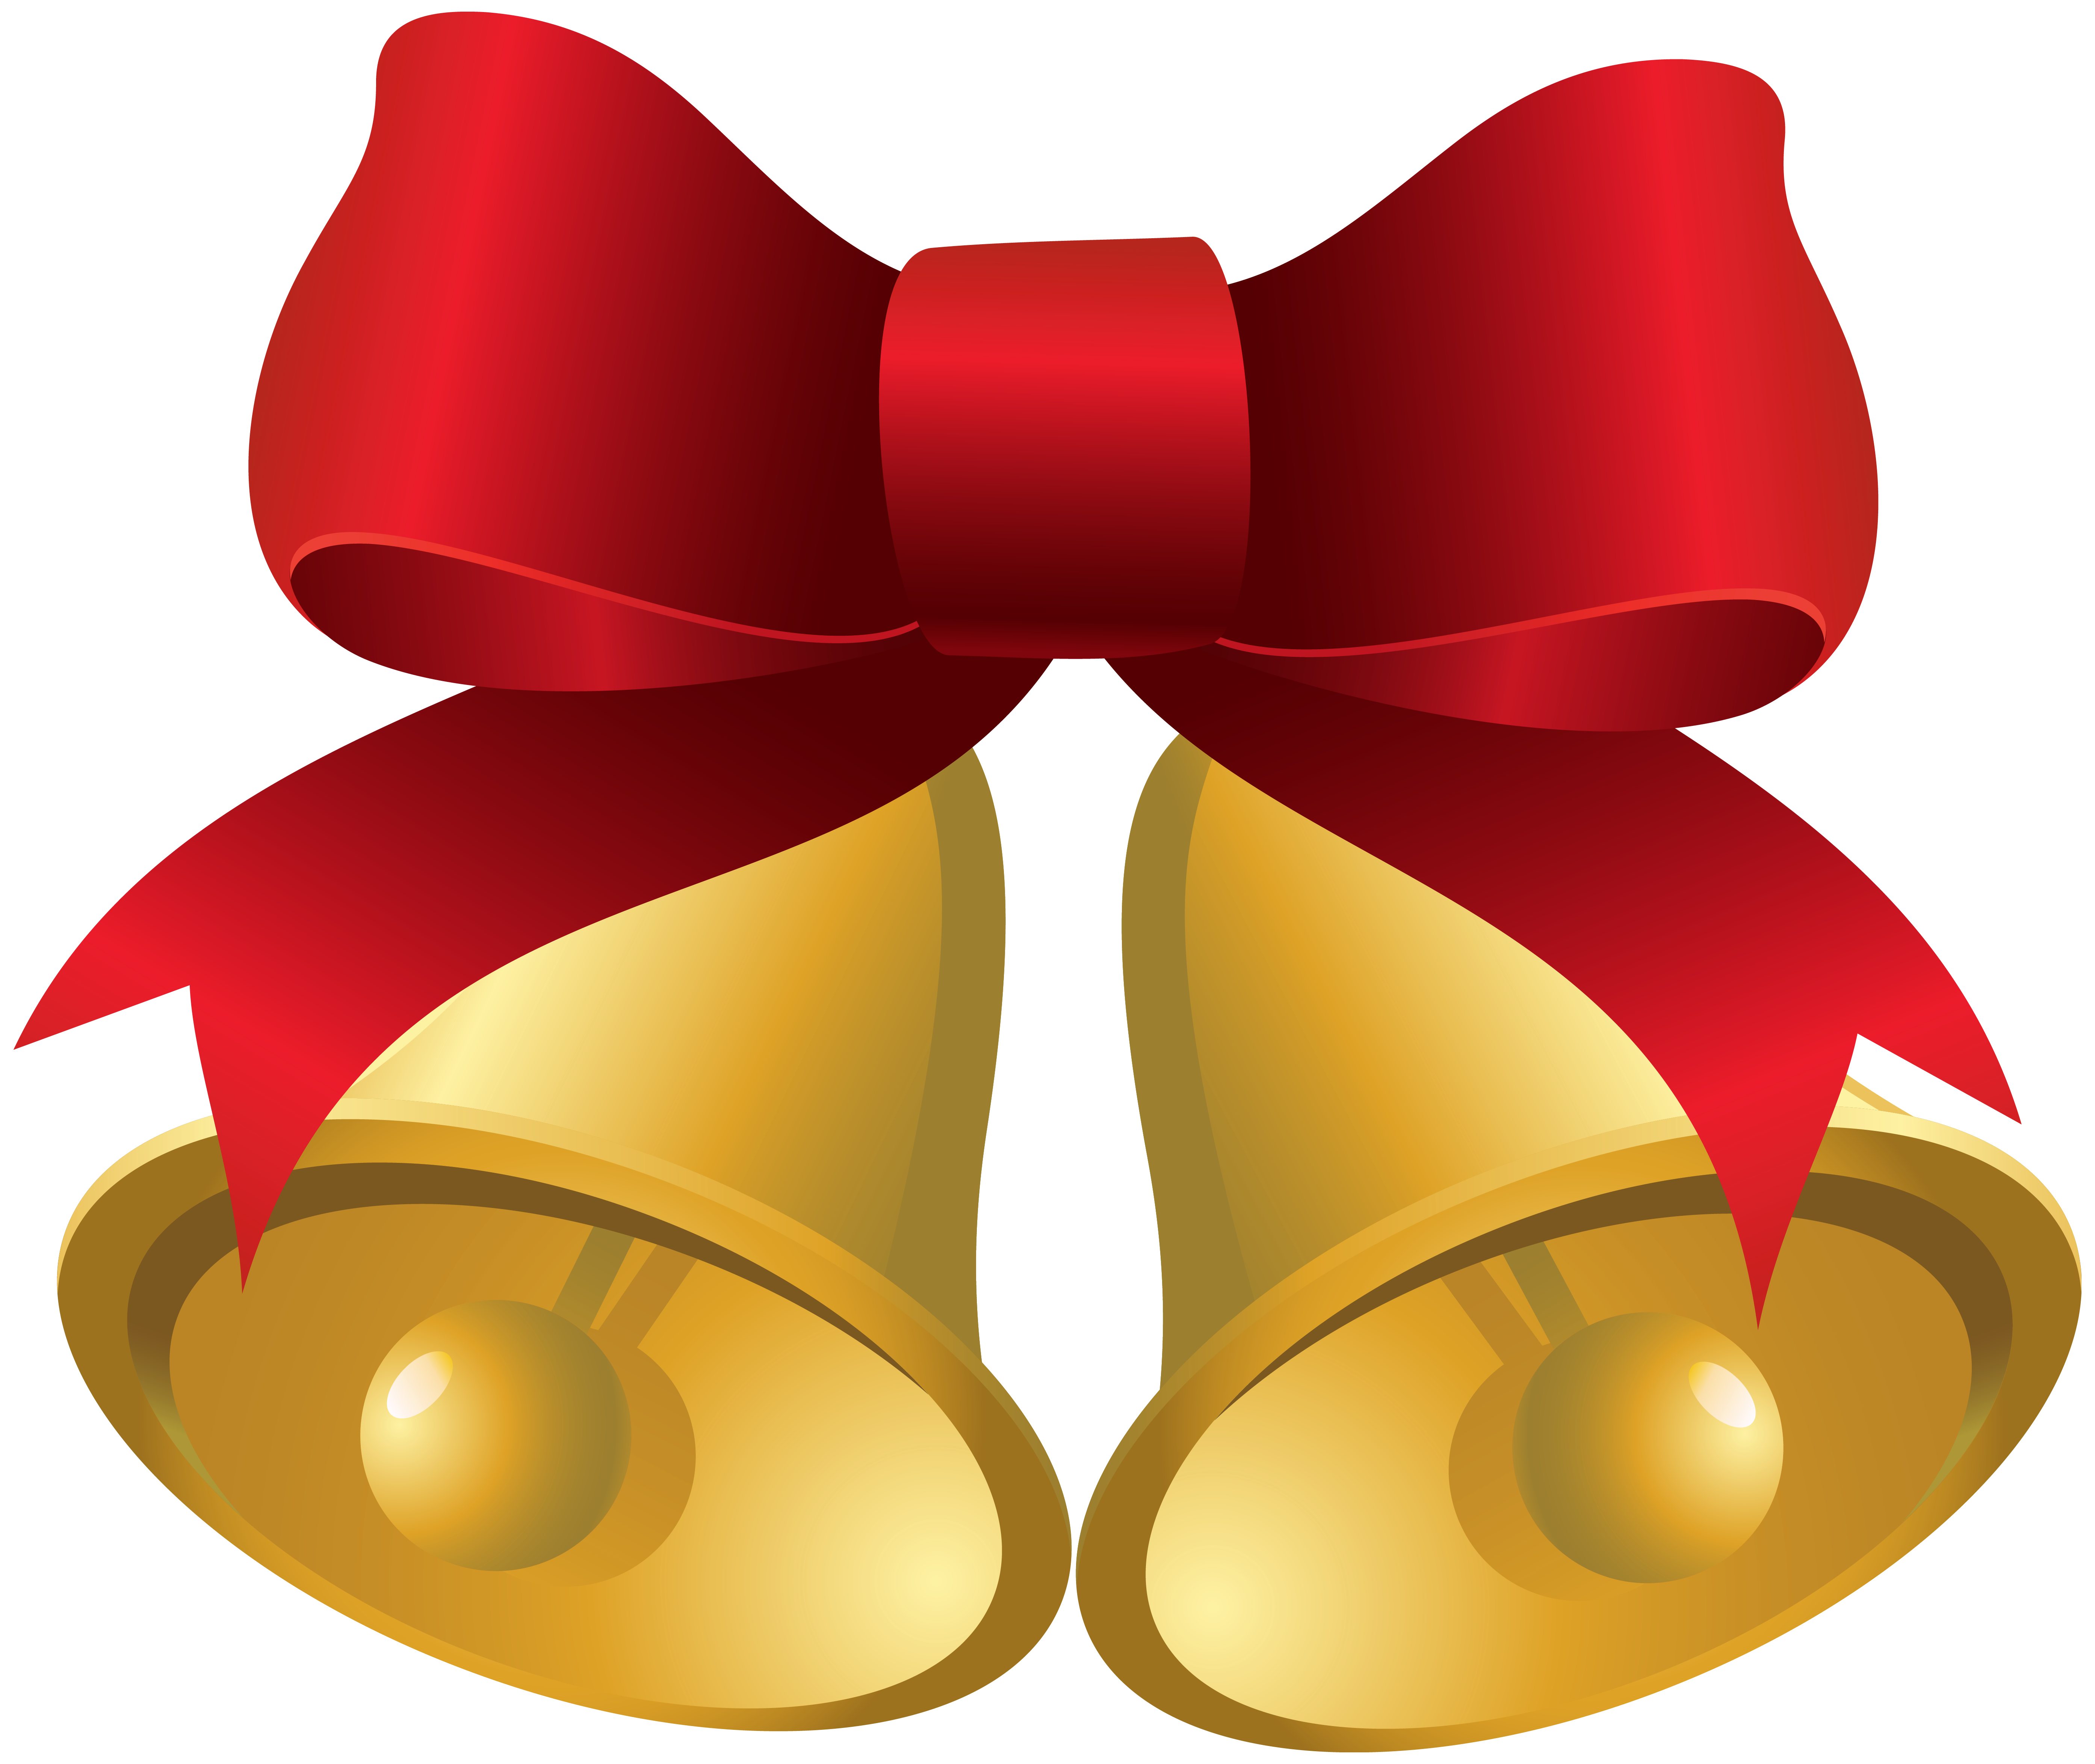 Christmas red bell with bow - vector clip art